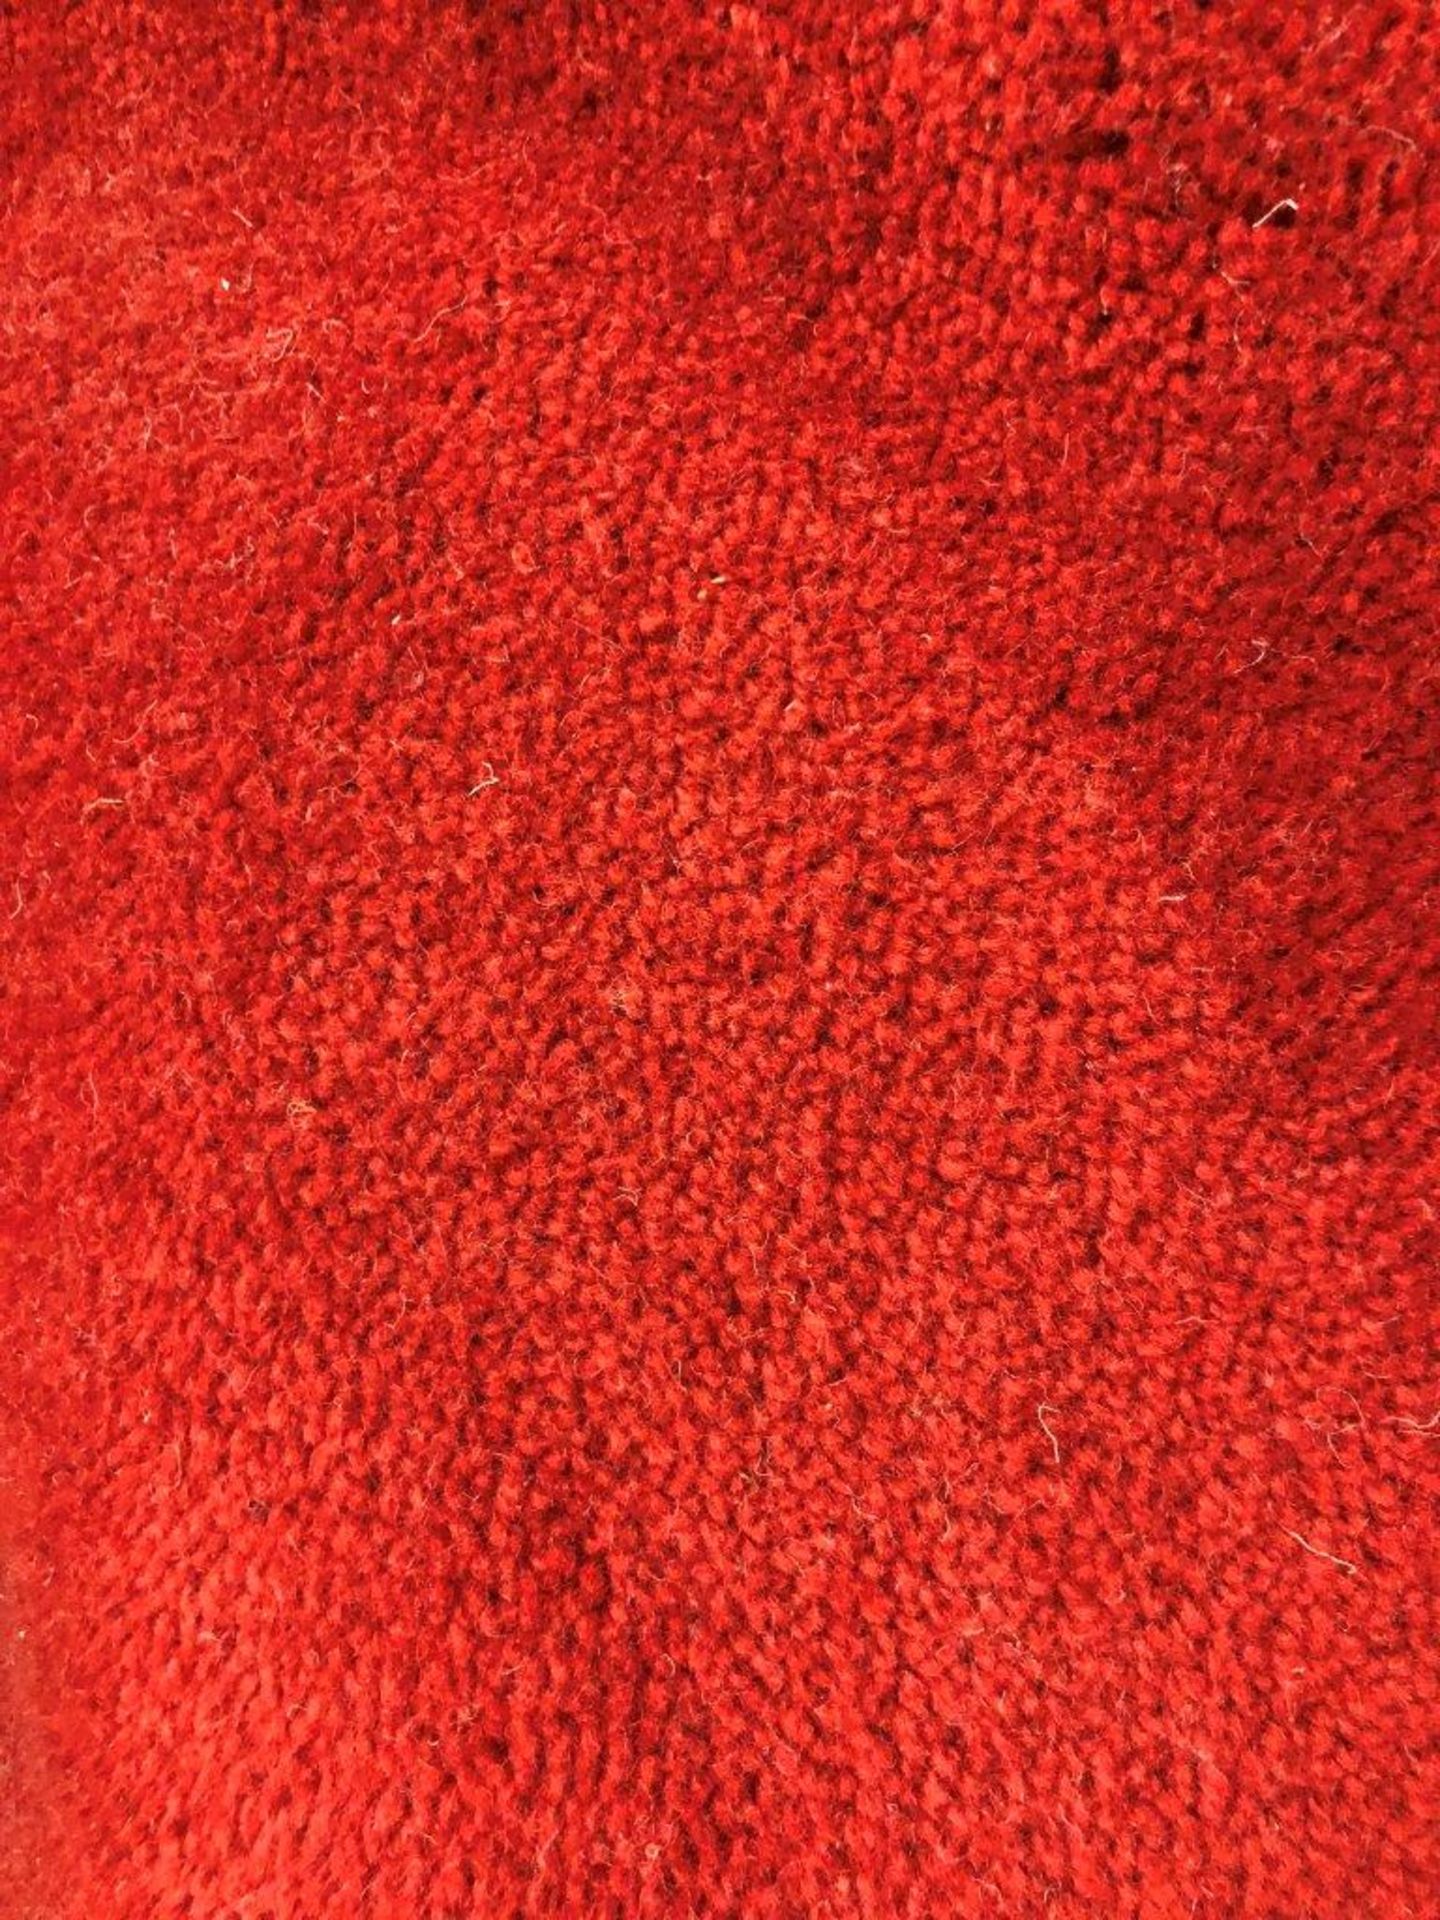 1 x Ryalux Carpet End Roll - Red 3.0x4.0m2 - Image 3 of 3